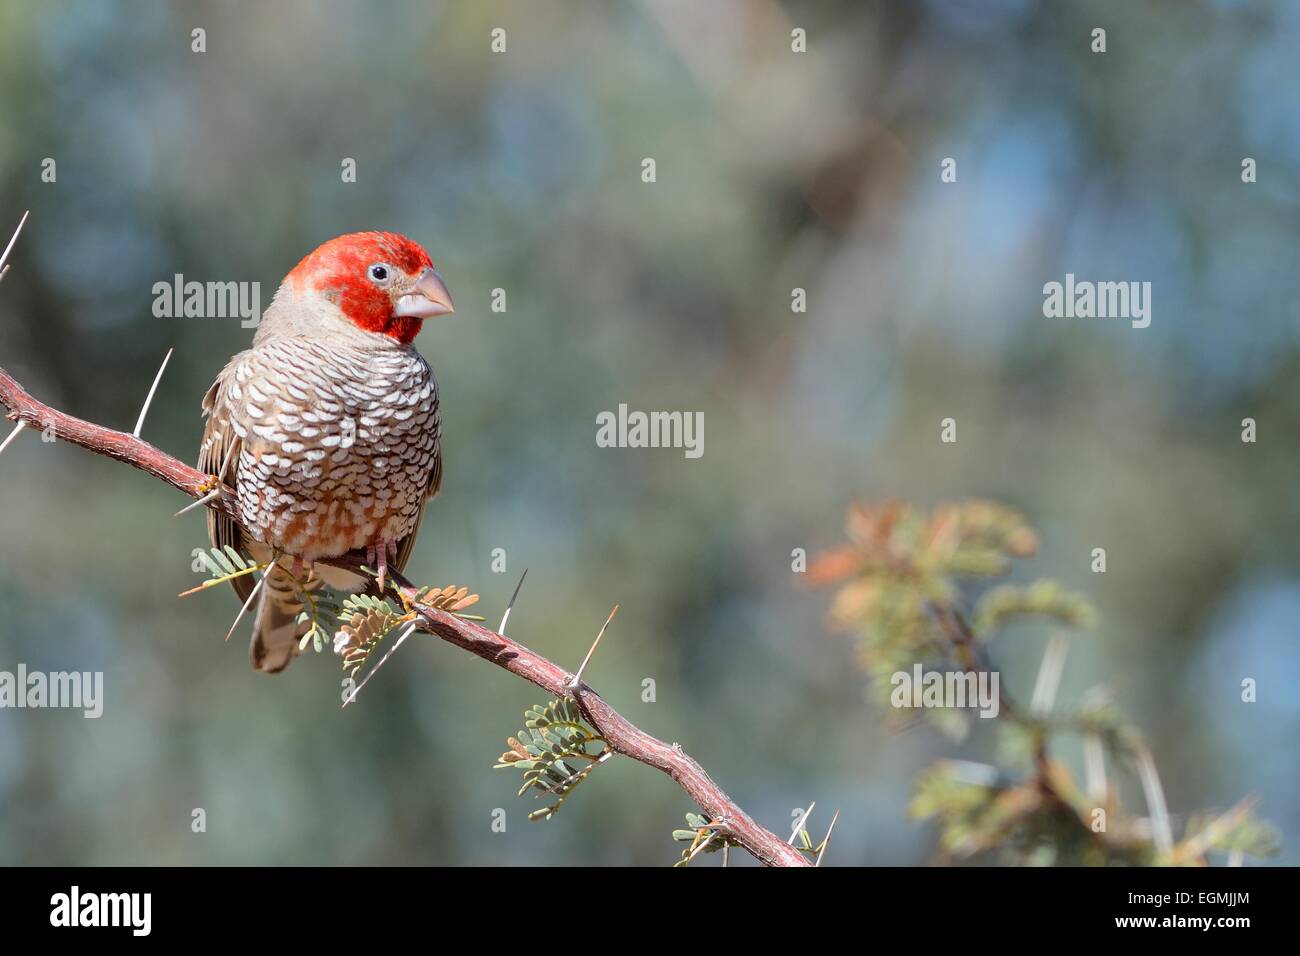 Red-headed Finch (Amadina erythrocephala), male perched on a branch, Kgalagadi Transfrontier Park, Northern Cape, South Africa Stock Photo